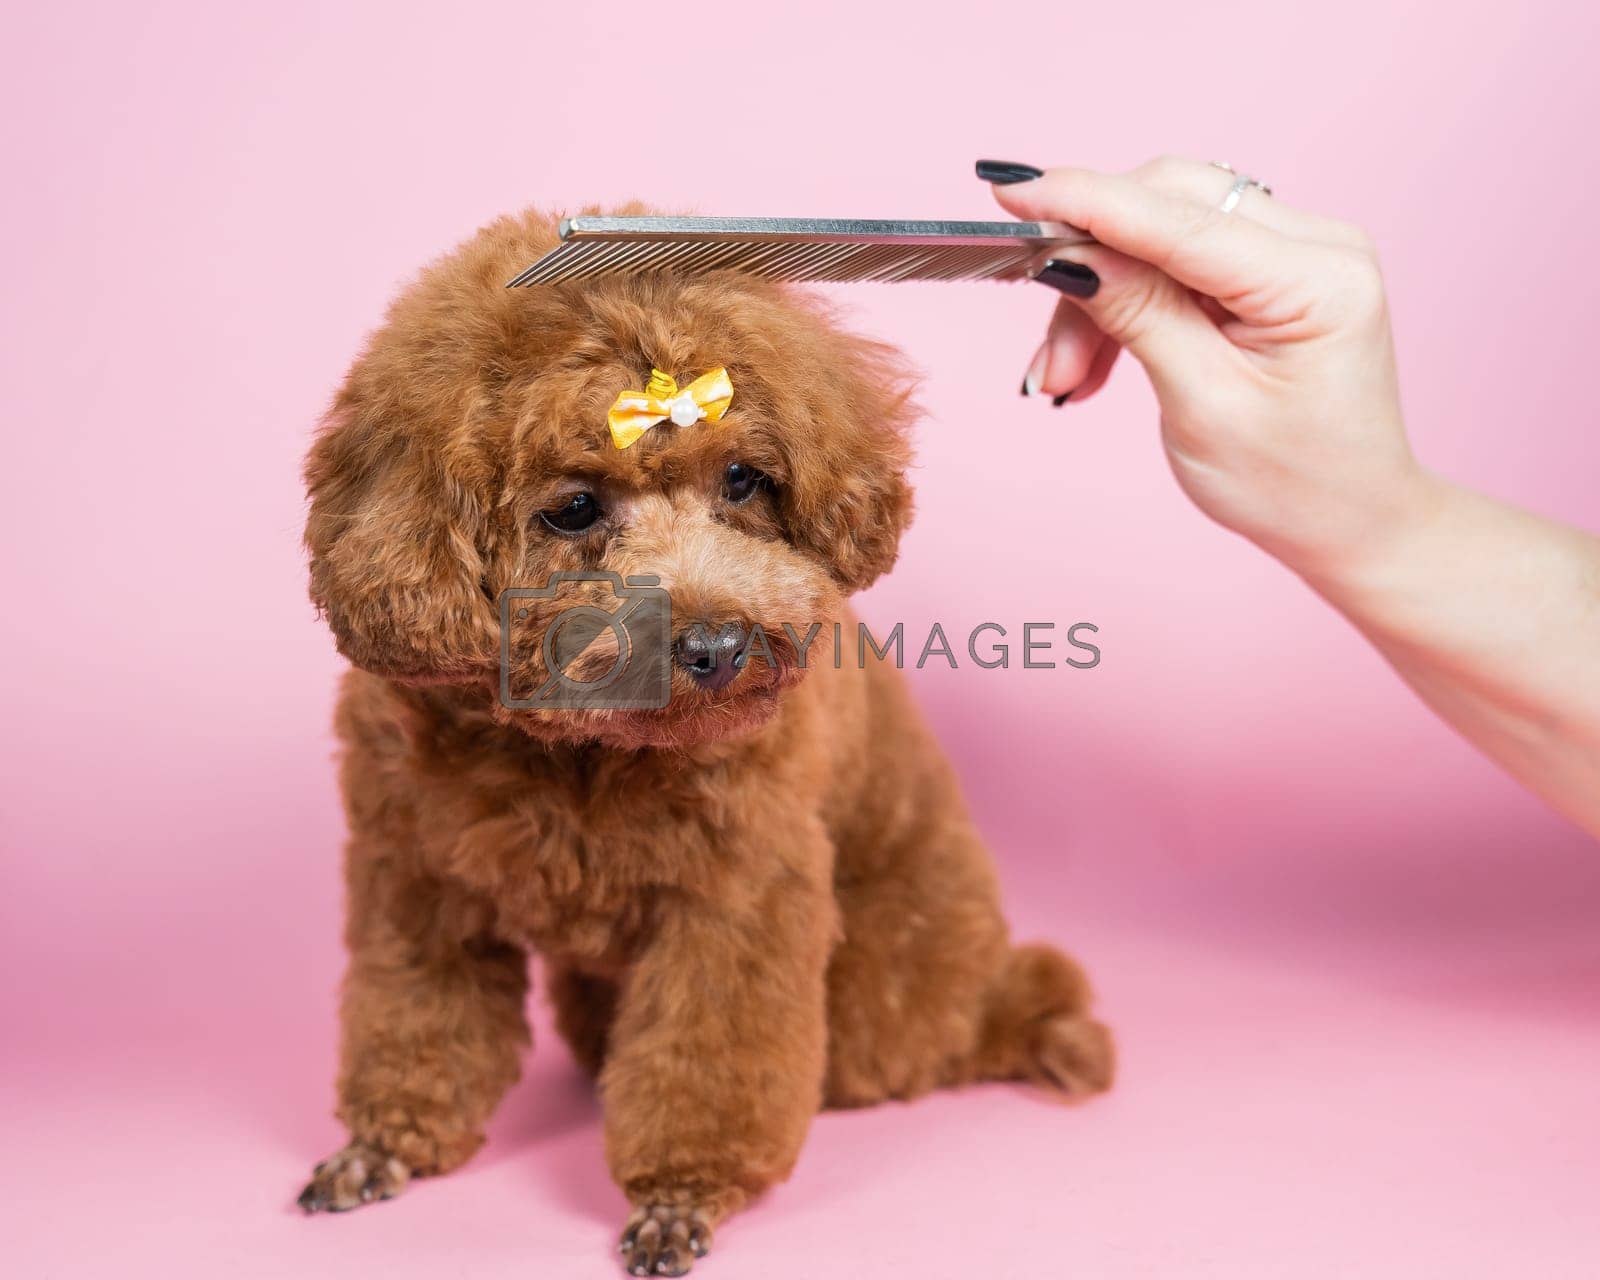 Royalty free image of Woman combing a mini poodle on a pink background. by mrwed54